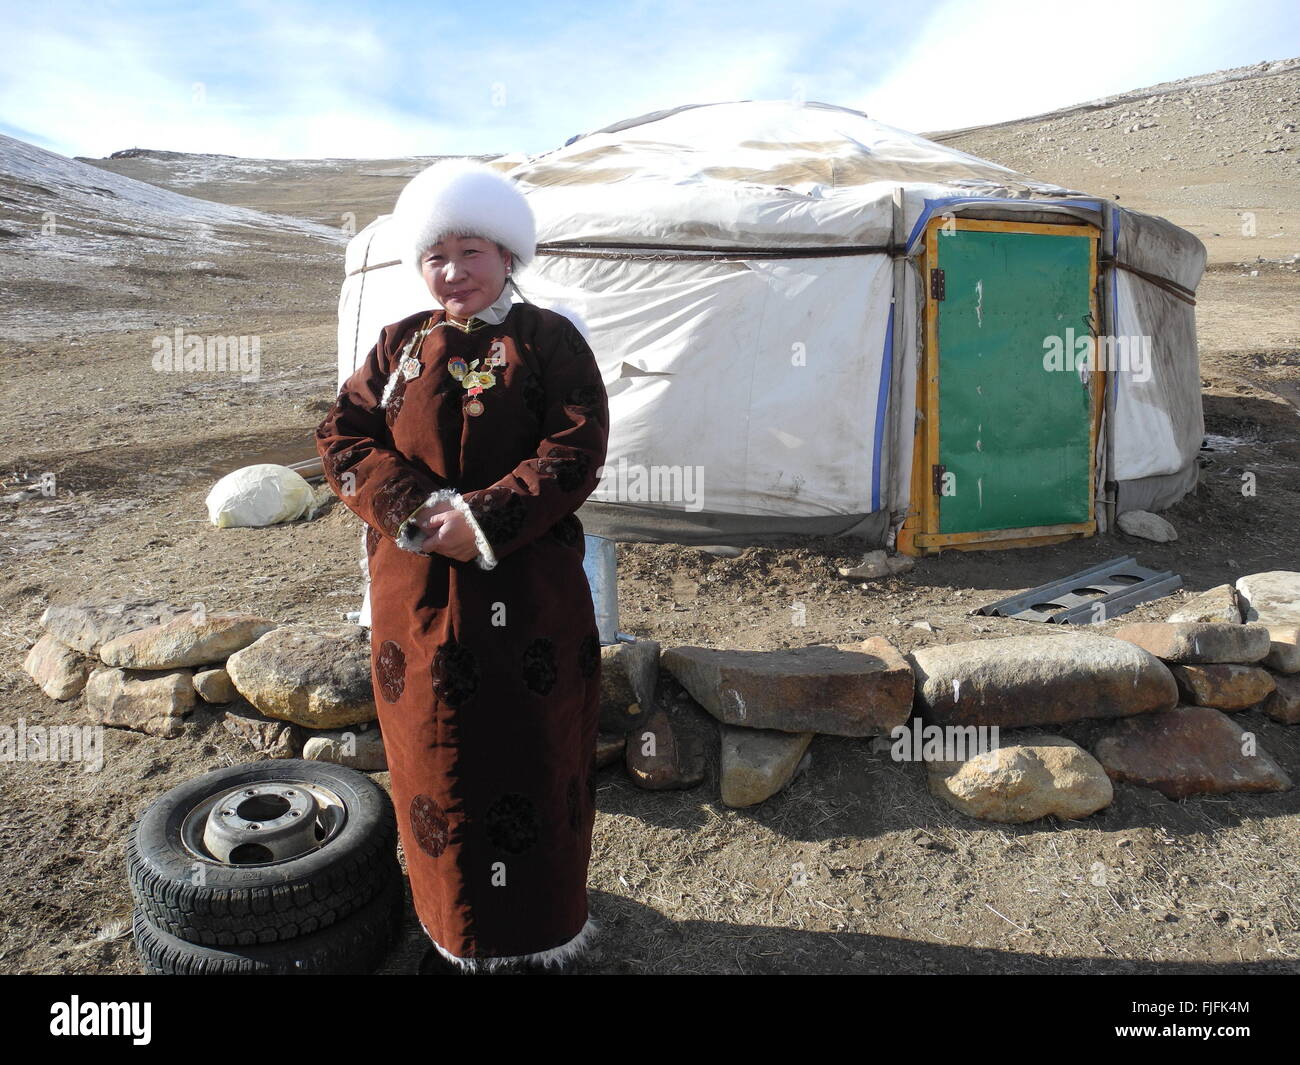 Herdswoman Uranchimeg stands in front of her family's yurt despite the inhospitable climate in Bayankhongor Province, Mongolia, 24 February 2016. 'We are noticing climate change in the region,' Uranchimeg says. There is less vegetation but more rodents in the shorter grasses. 'This is a great problem, since they eat away the grass for our livestock.' Photo: JOANNA CHIU/dpa Stock Photo